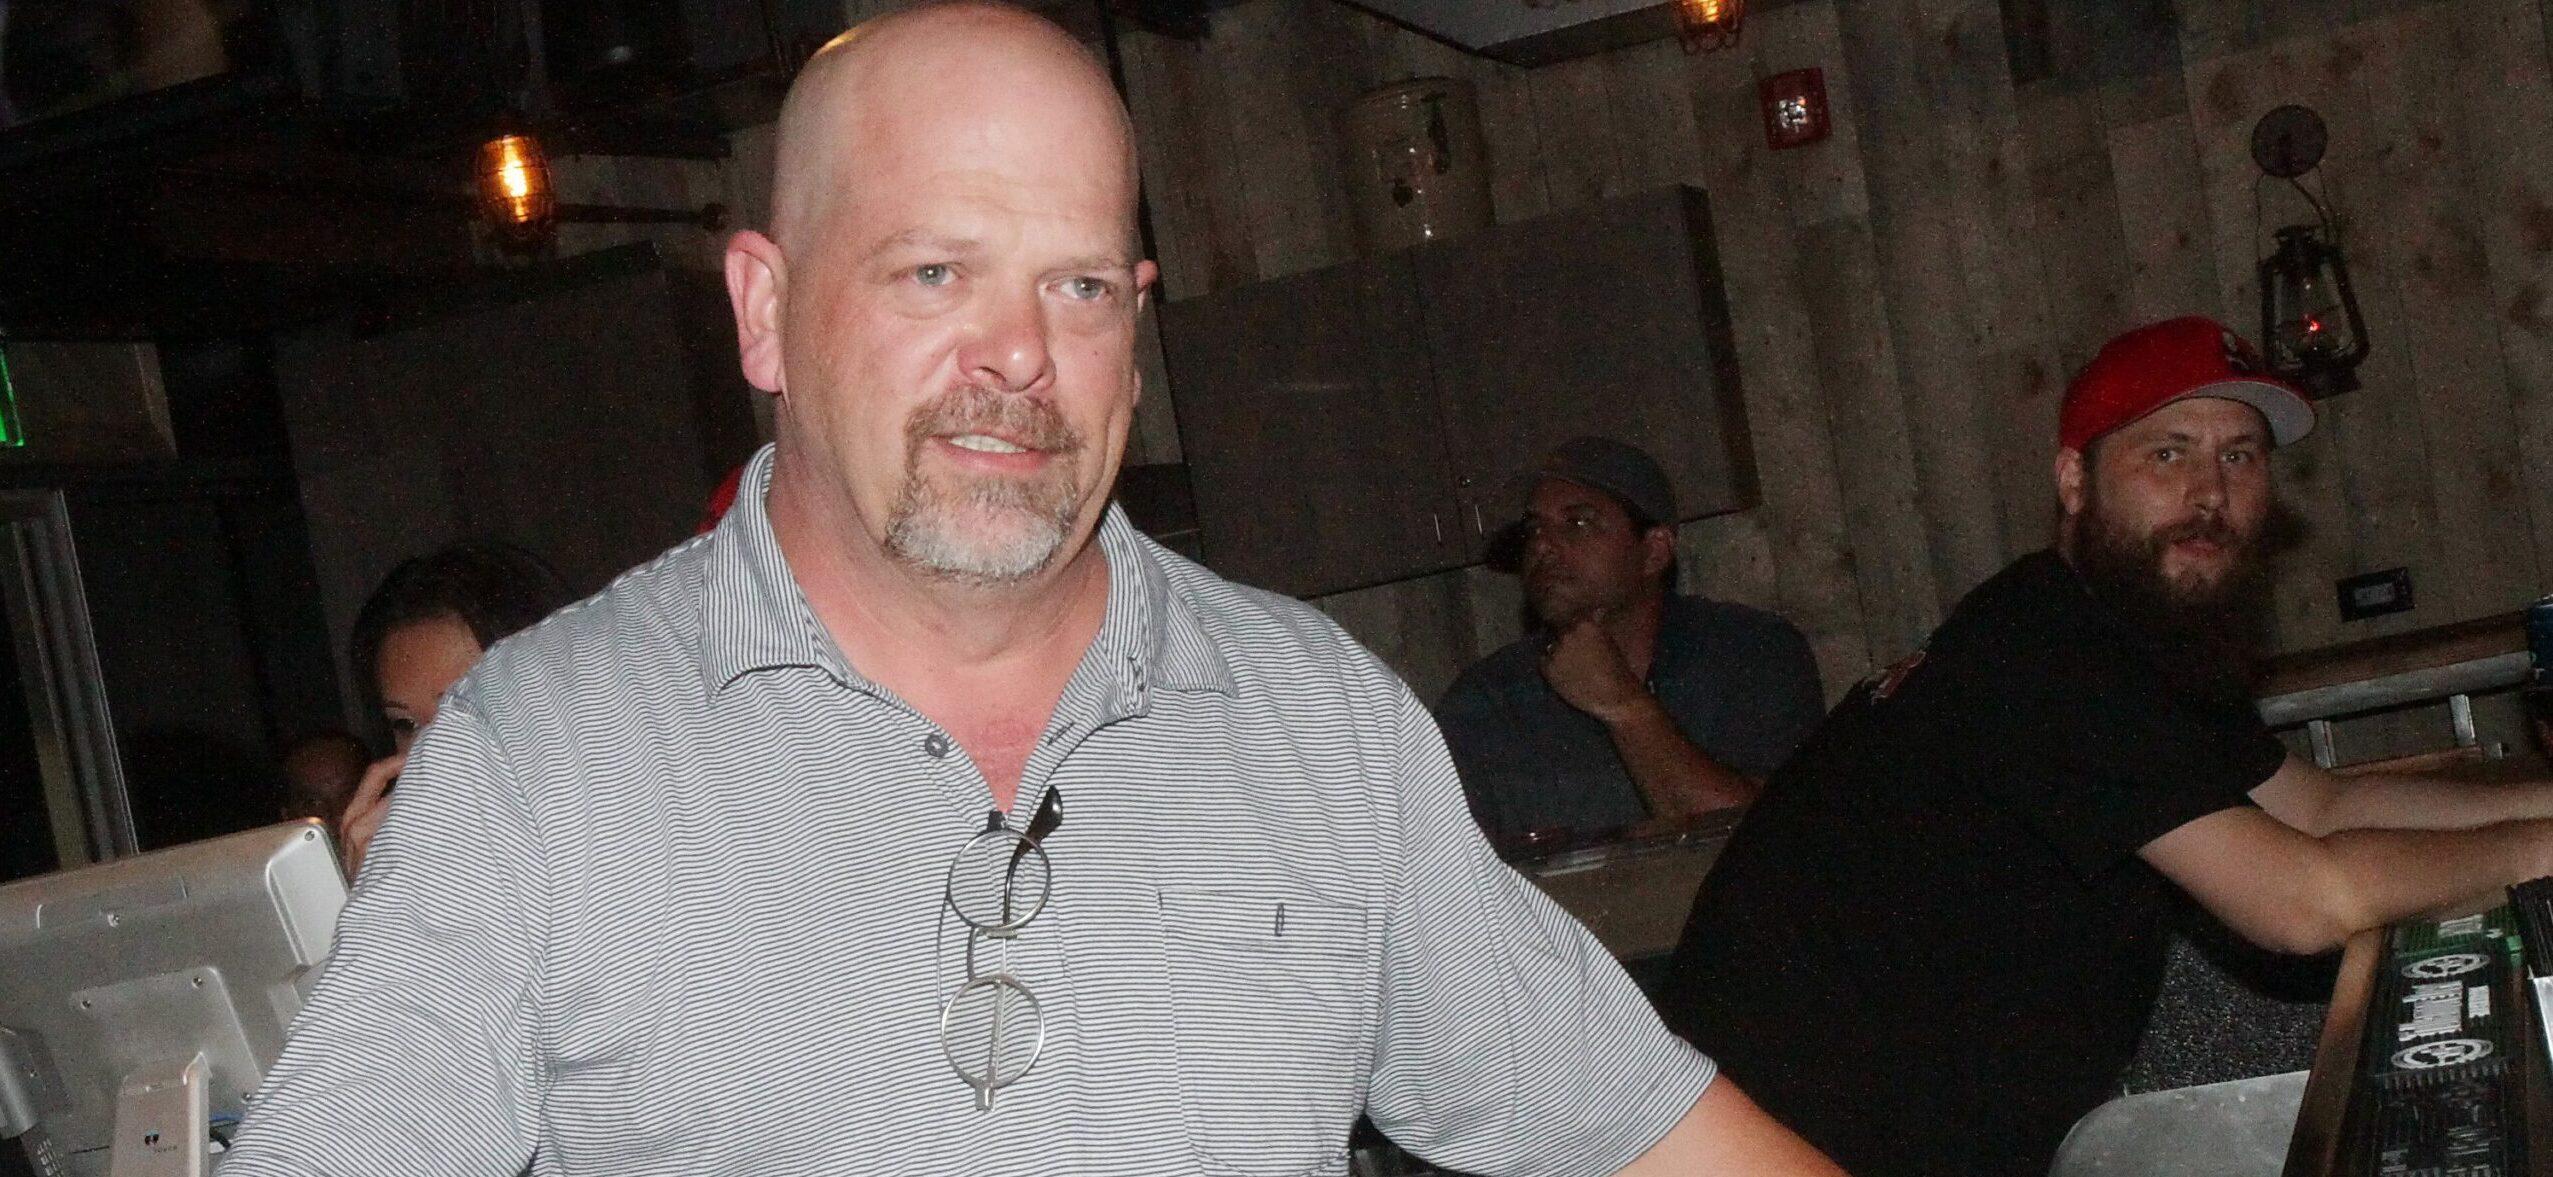 Pawn Stars Patriarch Rick Harrison Bellies up to the Bar for Record 14th TV Season